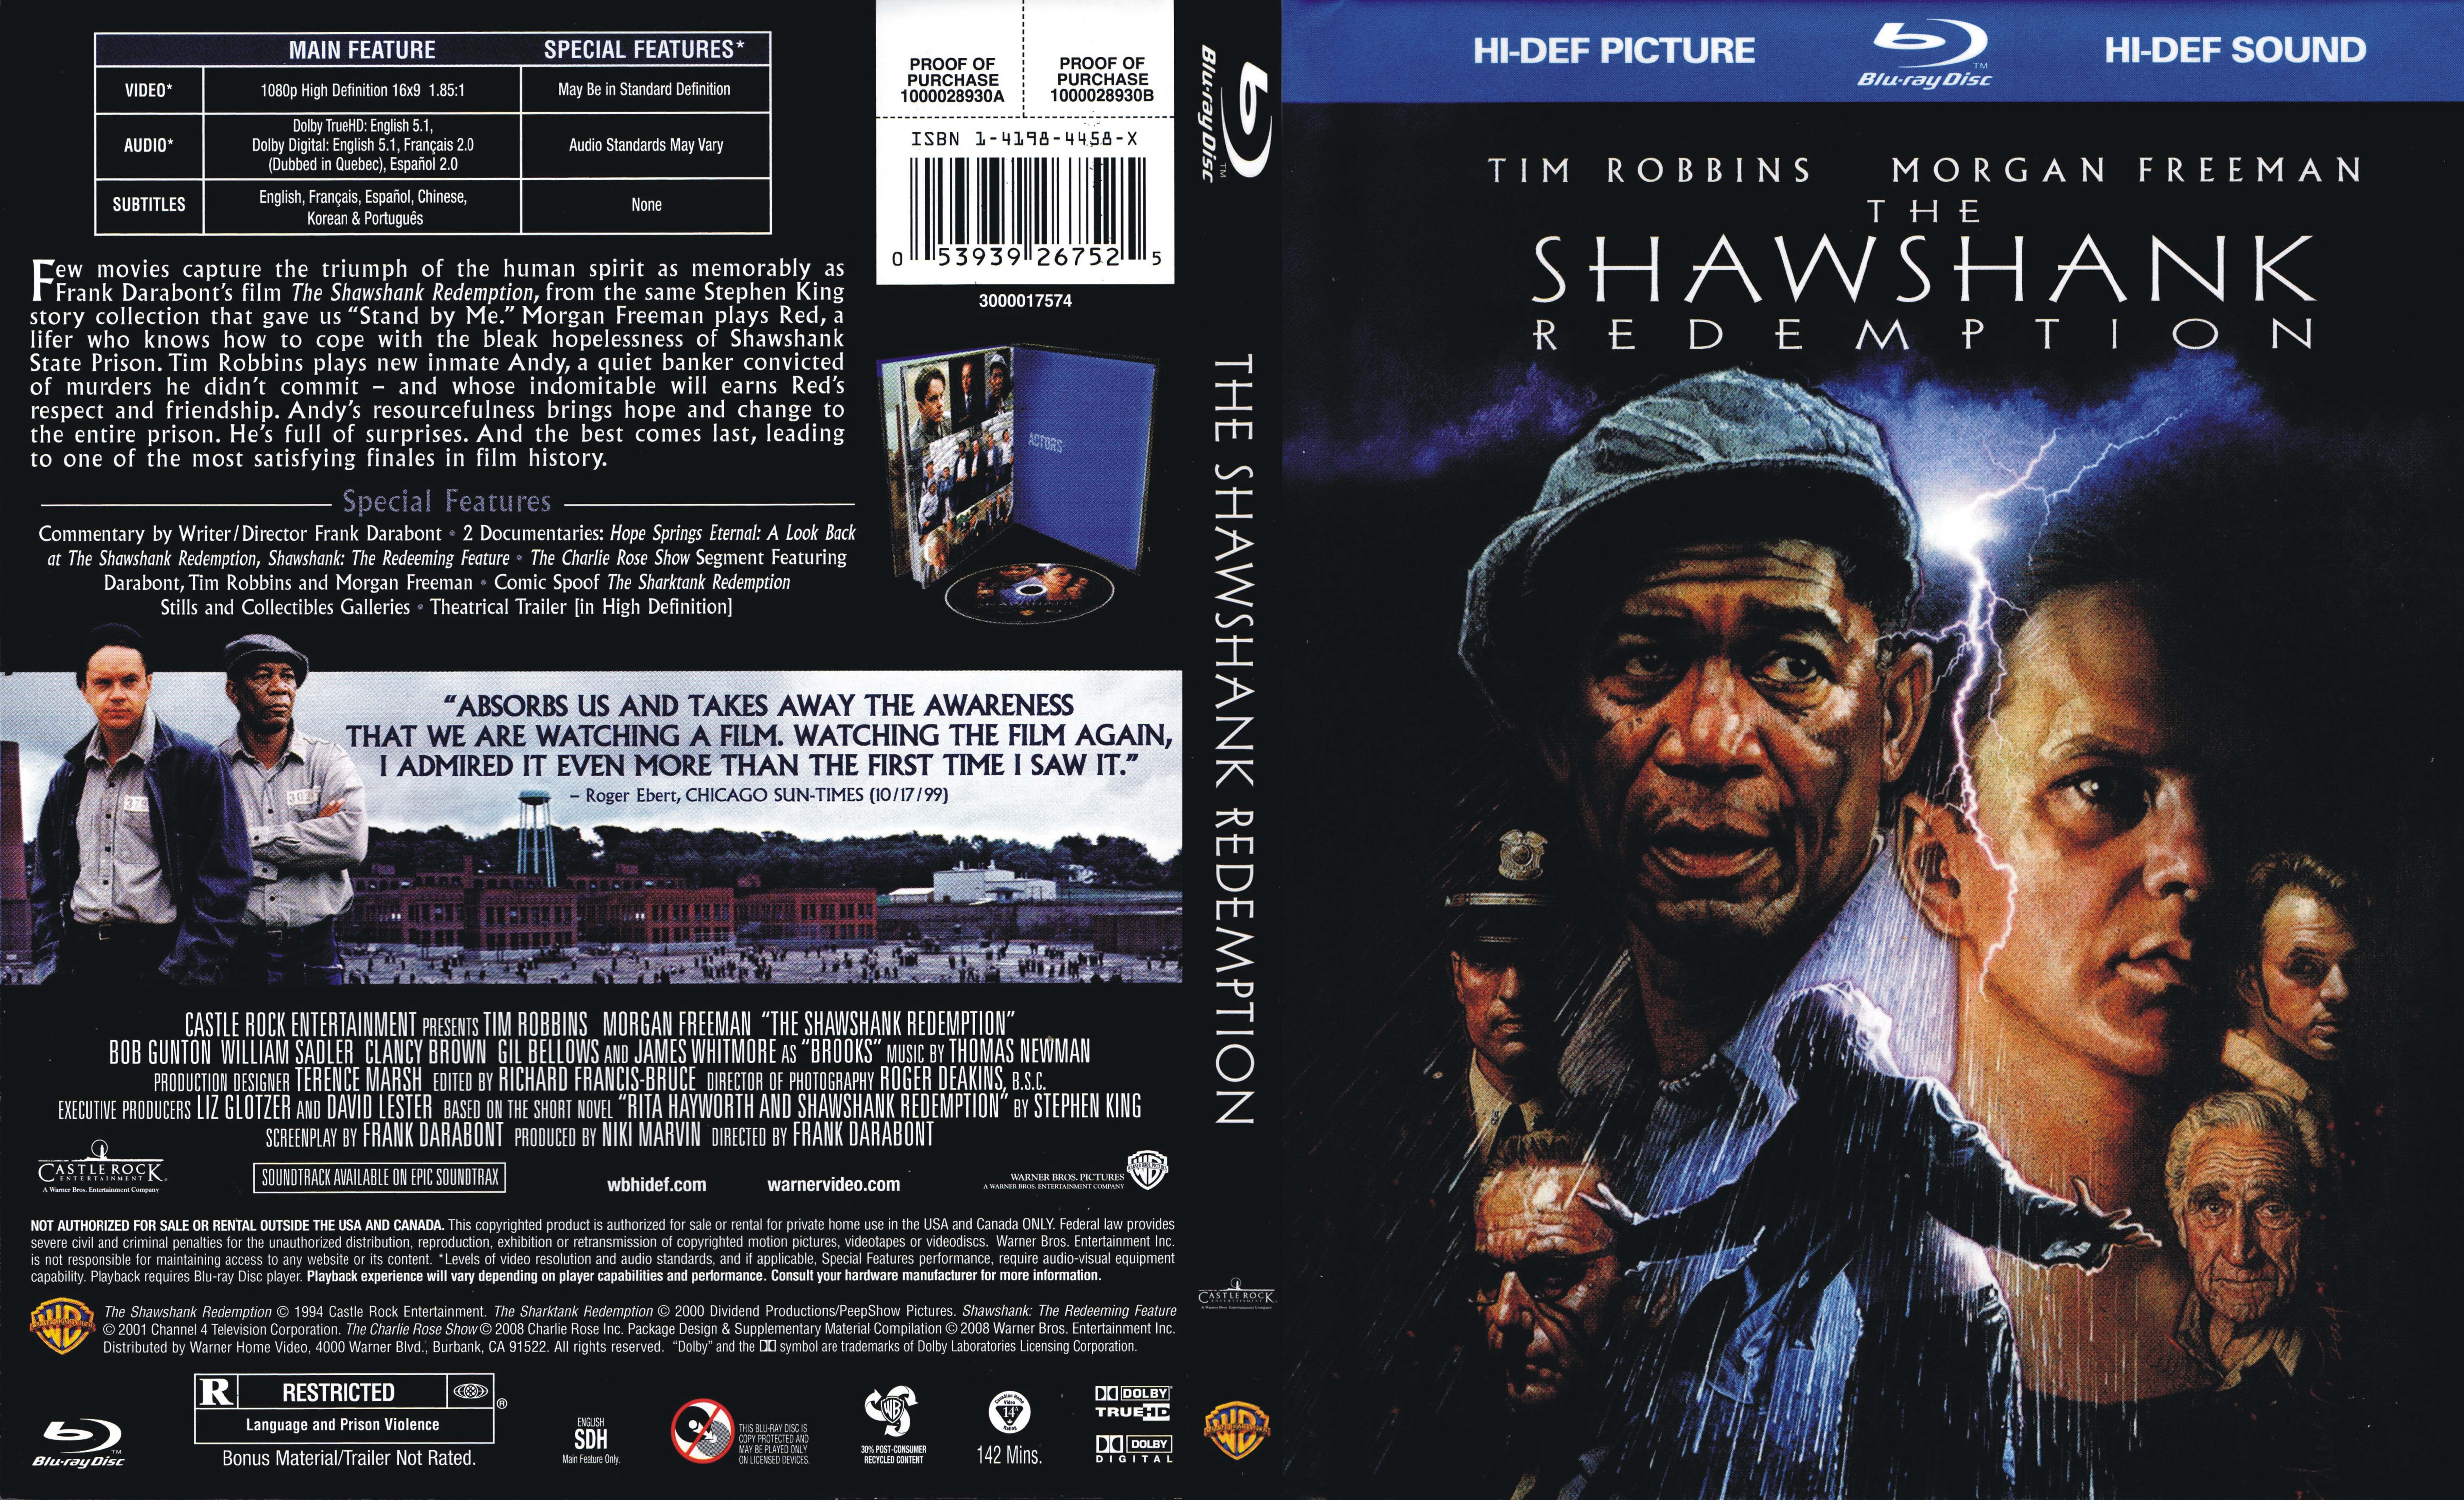 Jaquette DVD The Skawshank redemption - Les vads (BLU-RAY)